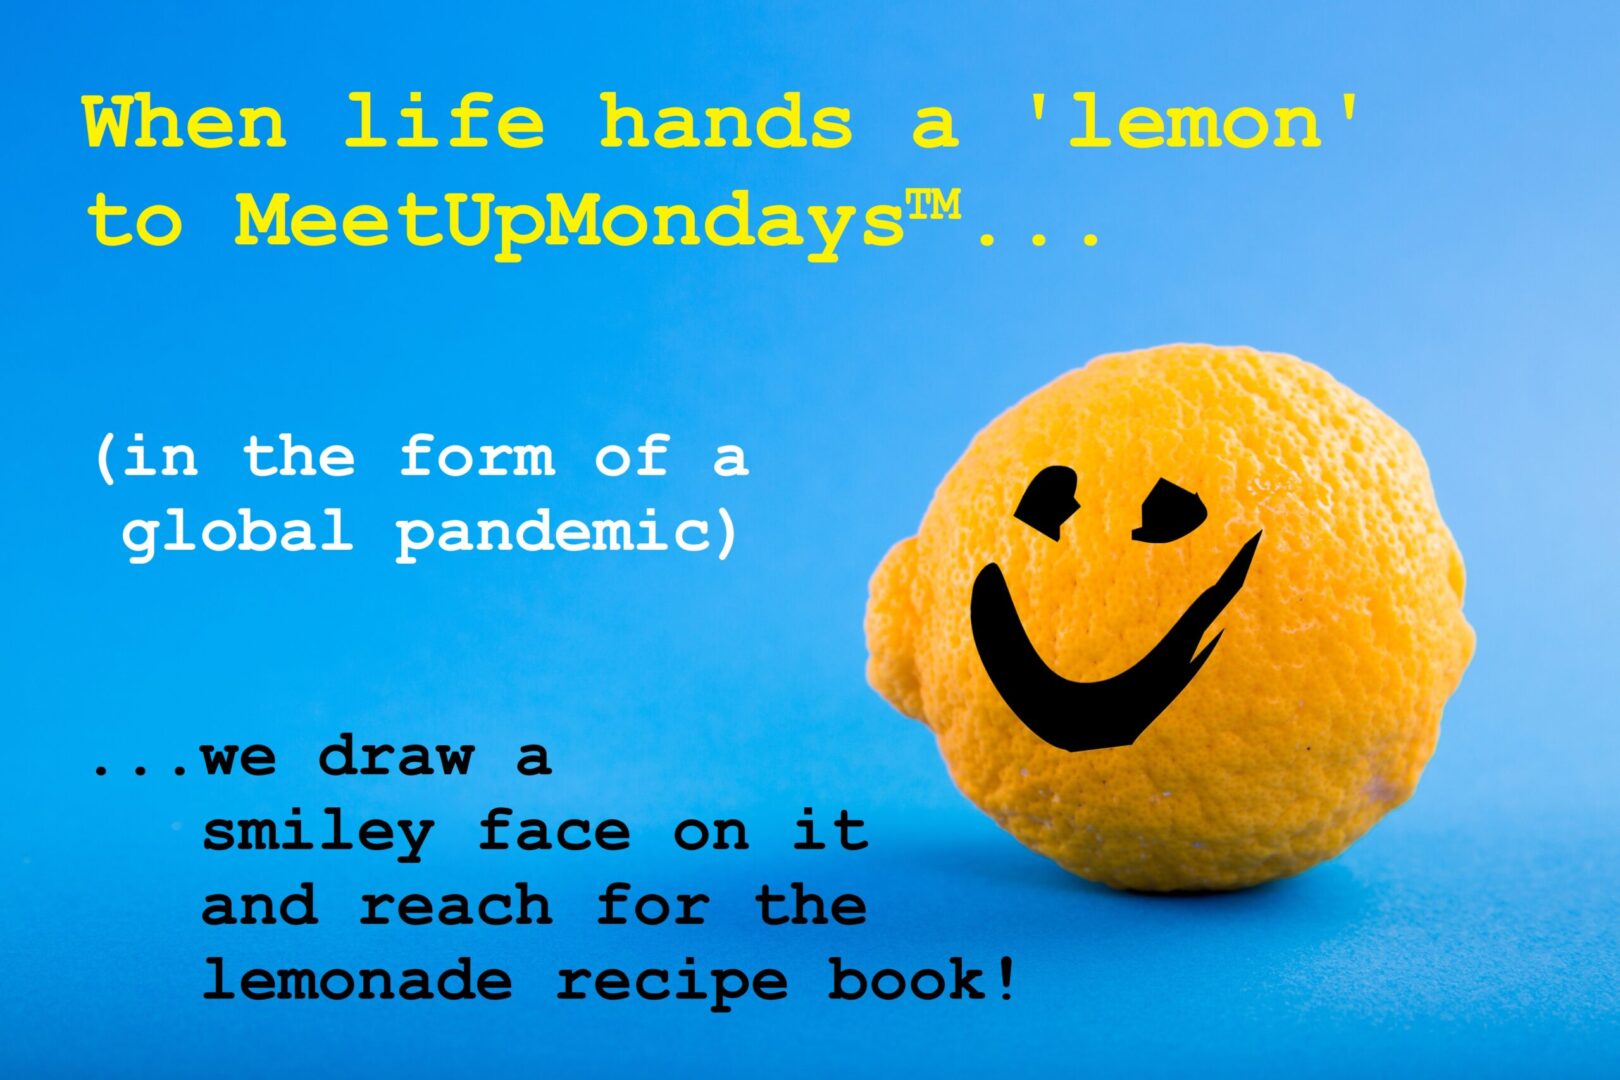 image of a lemon with a MeetUpMondays smiley face on it, sitting against a blue background, and the text "WHen life hands MeetUpMondays a lemon, we draw a smiley face on it and reached for the lemonade recipe book